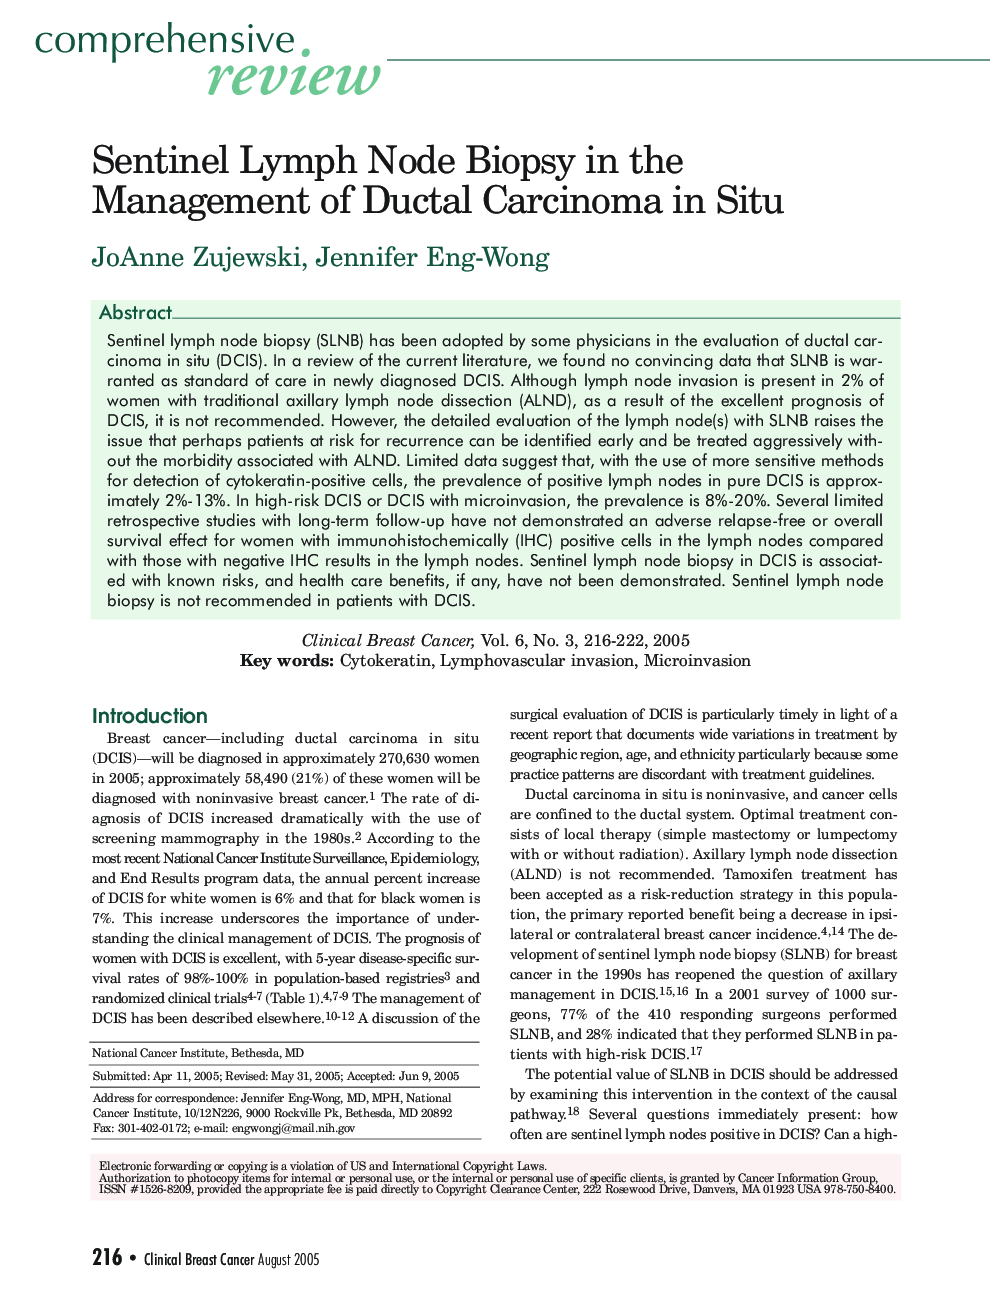 Sentinel Lymph Node Biopsy in the Management of Ductal Carcinoma In Situ